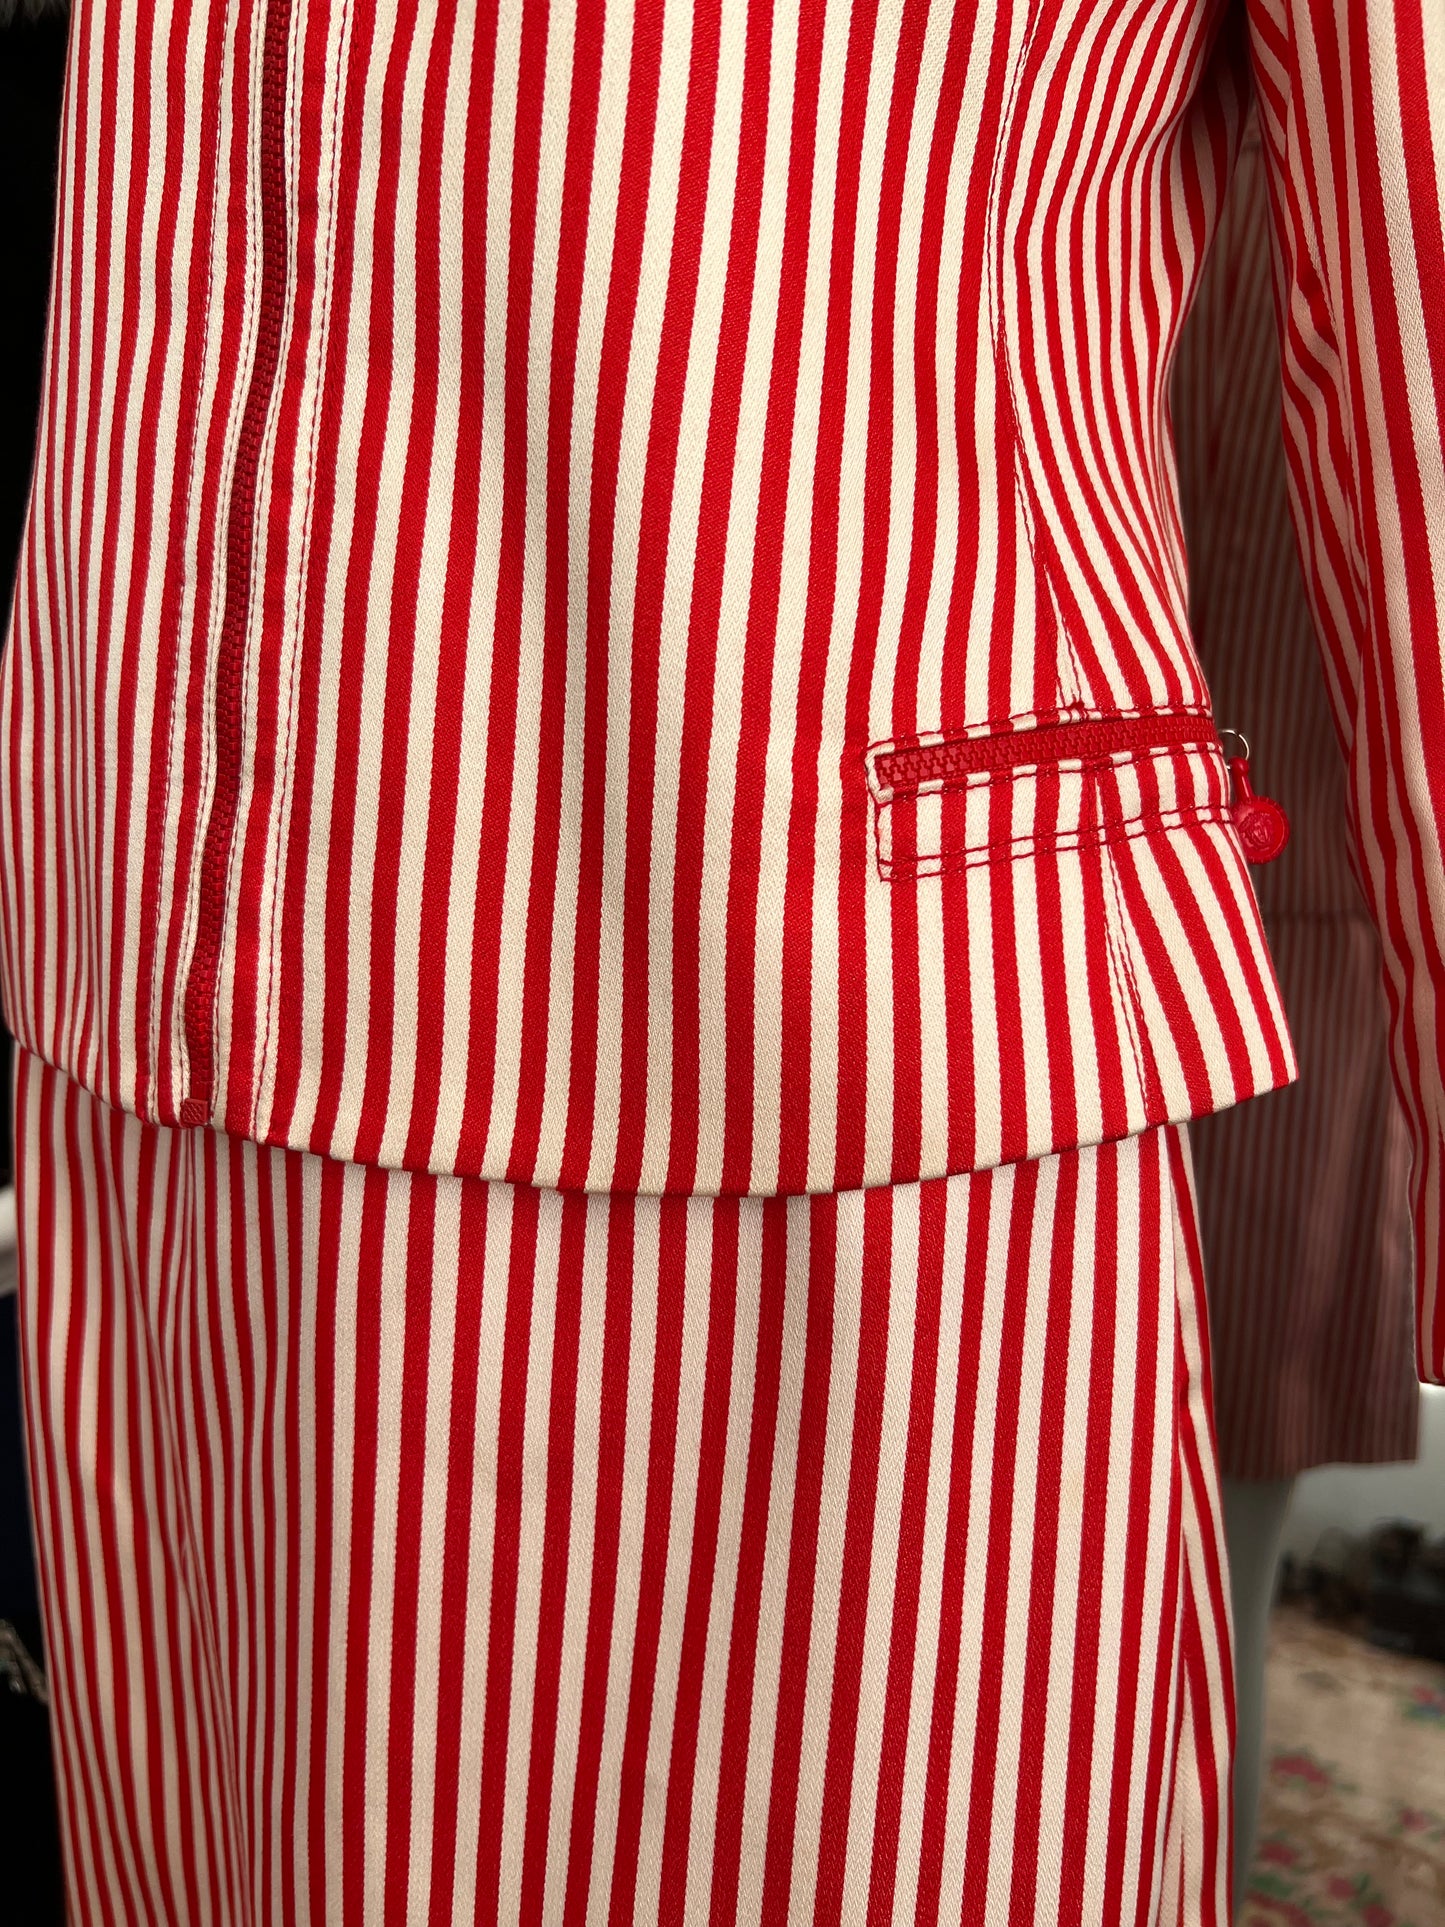 Gianni Versace Couture SS1993 Red/White Pinstripe Jacket and Skirt Set